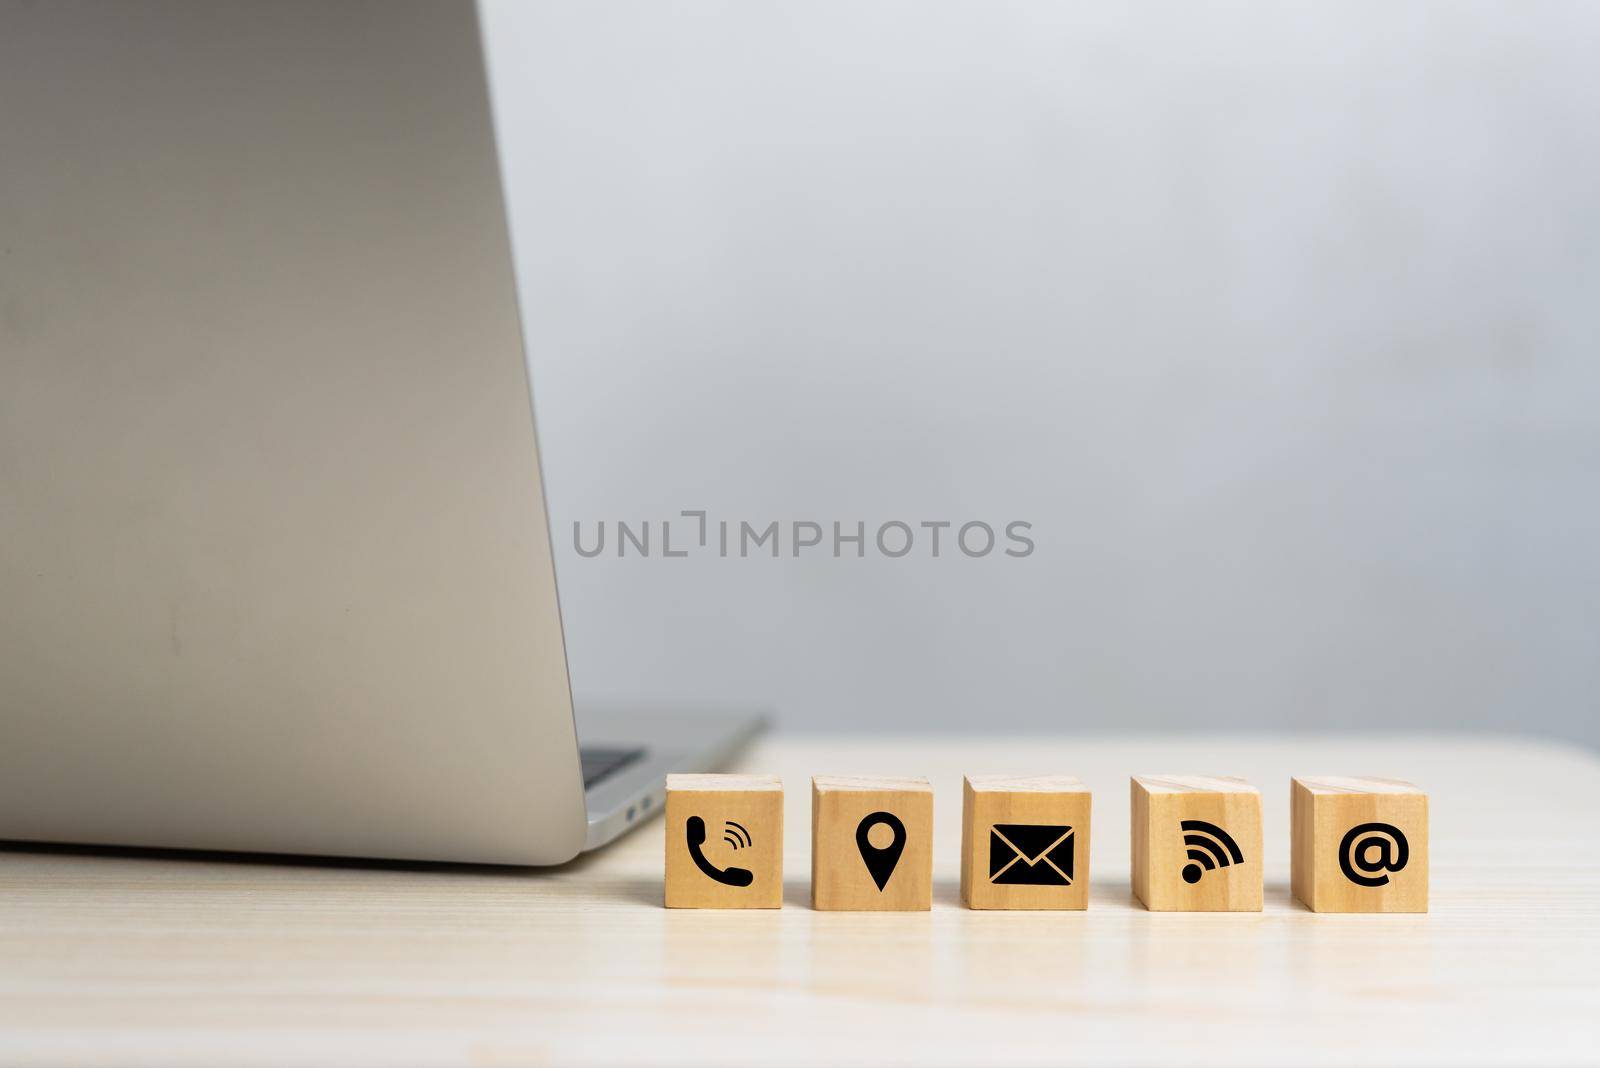 wood cube icon website page contact us or e-mail call phone, address, marketing concept on desk. by aoo3771